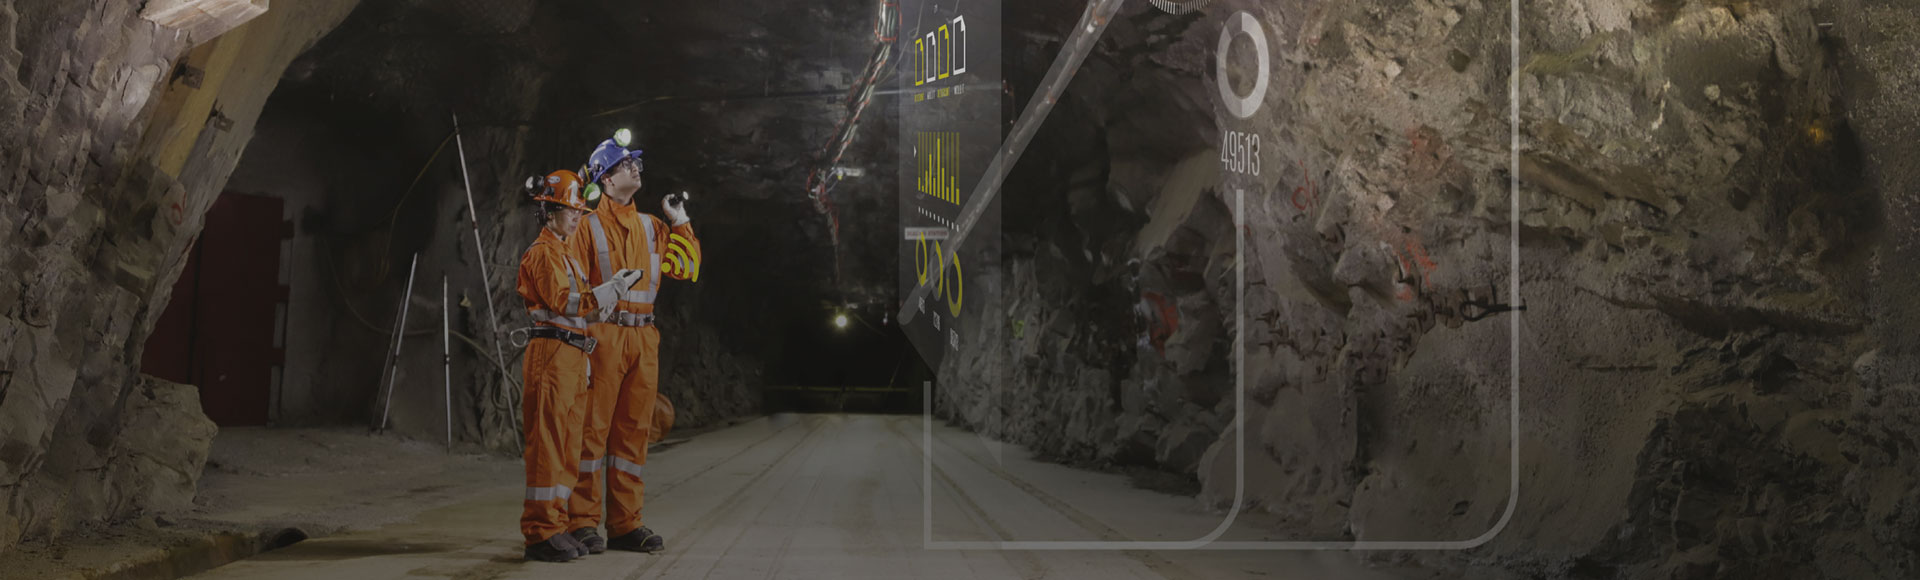 Two Hatch advisory team members providing business transformation and improvement advisory services in a digital mine to improve performance and create sustainable value.